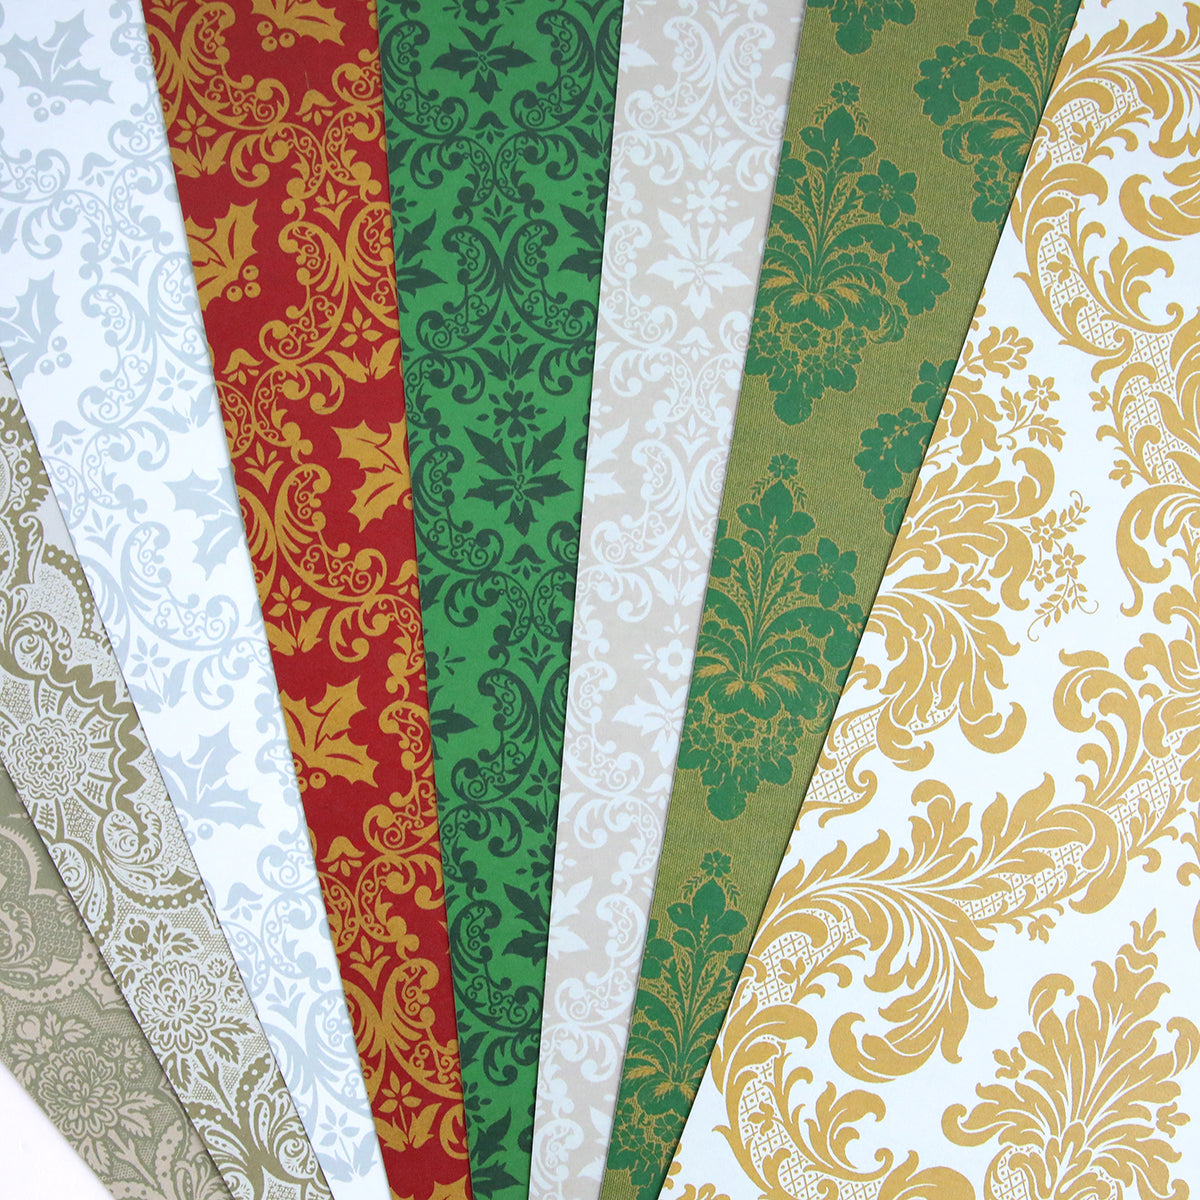 a group of different colored Christmas Damask 12x12 Cardstock papers.